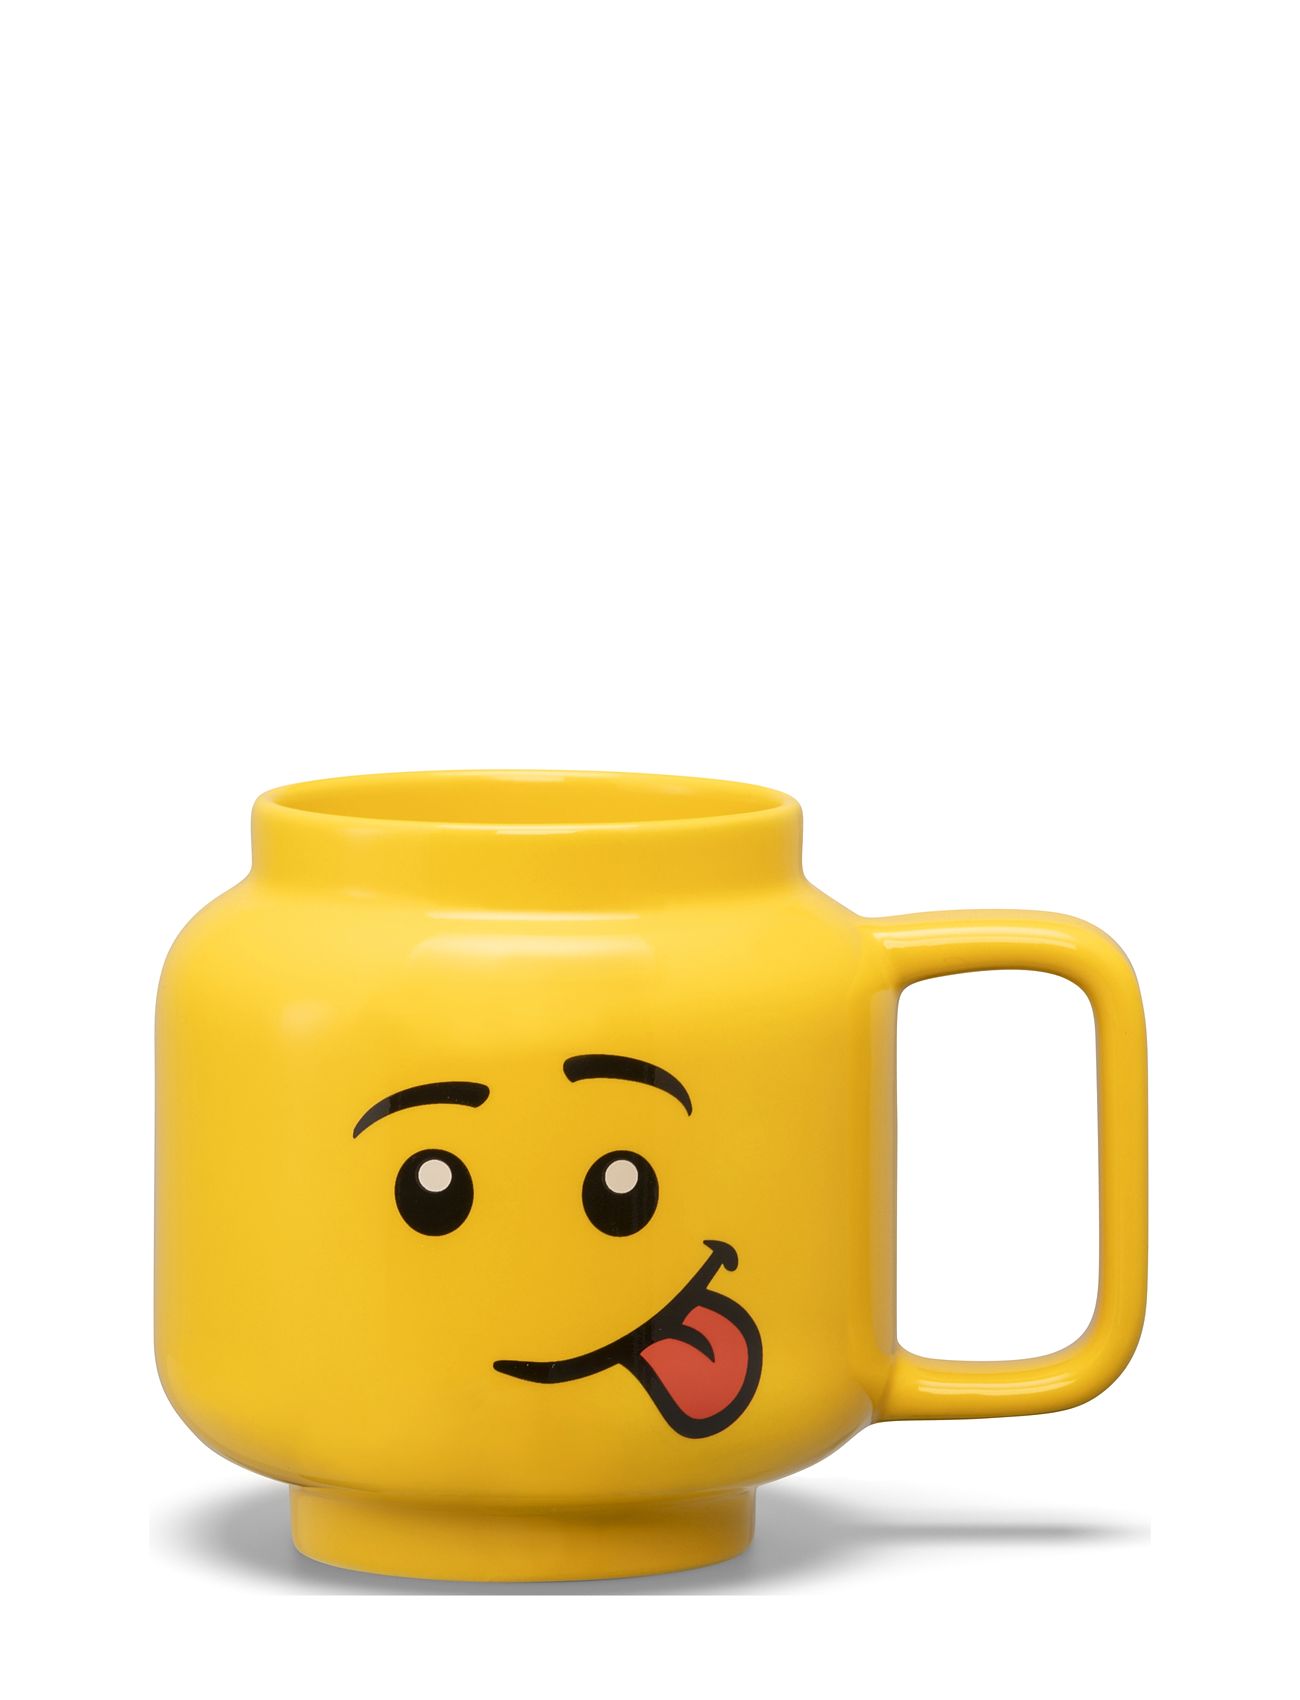 Lego Ceramic Mug Large Silly Home Meal Time Cups & Mugs Cups Yellow LEGO STORAGE